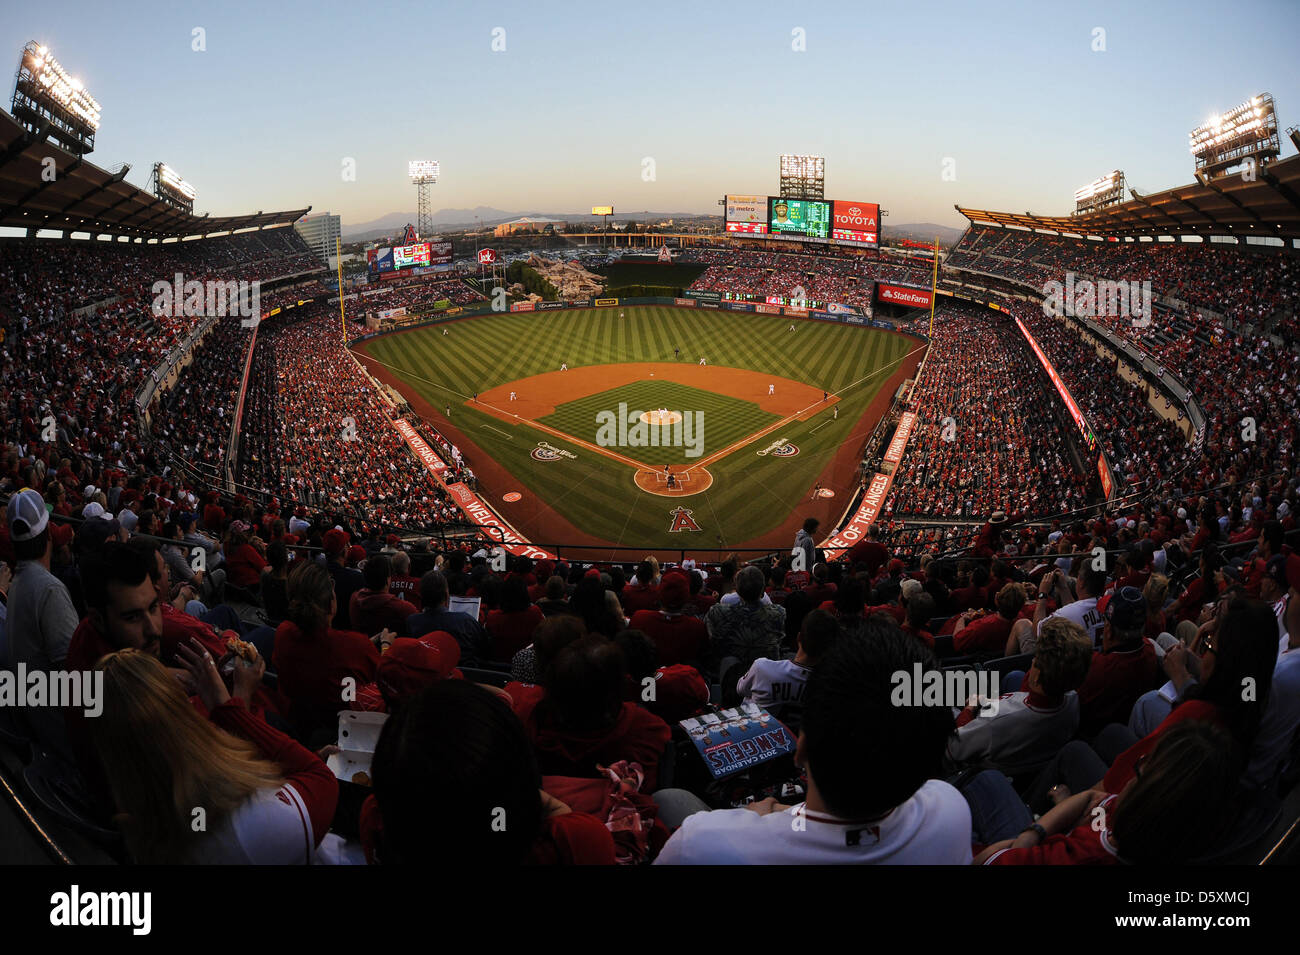 Anaheim, California, USA. 9th April 2013. A wide stadium view of the Angels in action during the Major League Baseball Home Opener game between the Oakland Athletics and the Los Angels at Angel Stadium in Anaheim, CA John Green/CSM/Alamy Live News Stock Photo